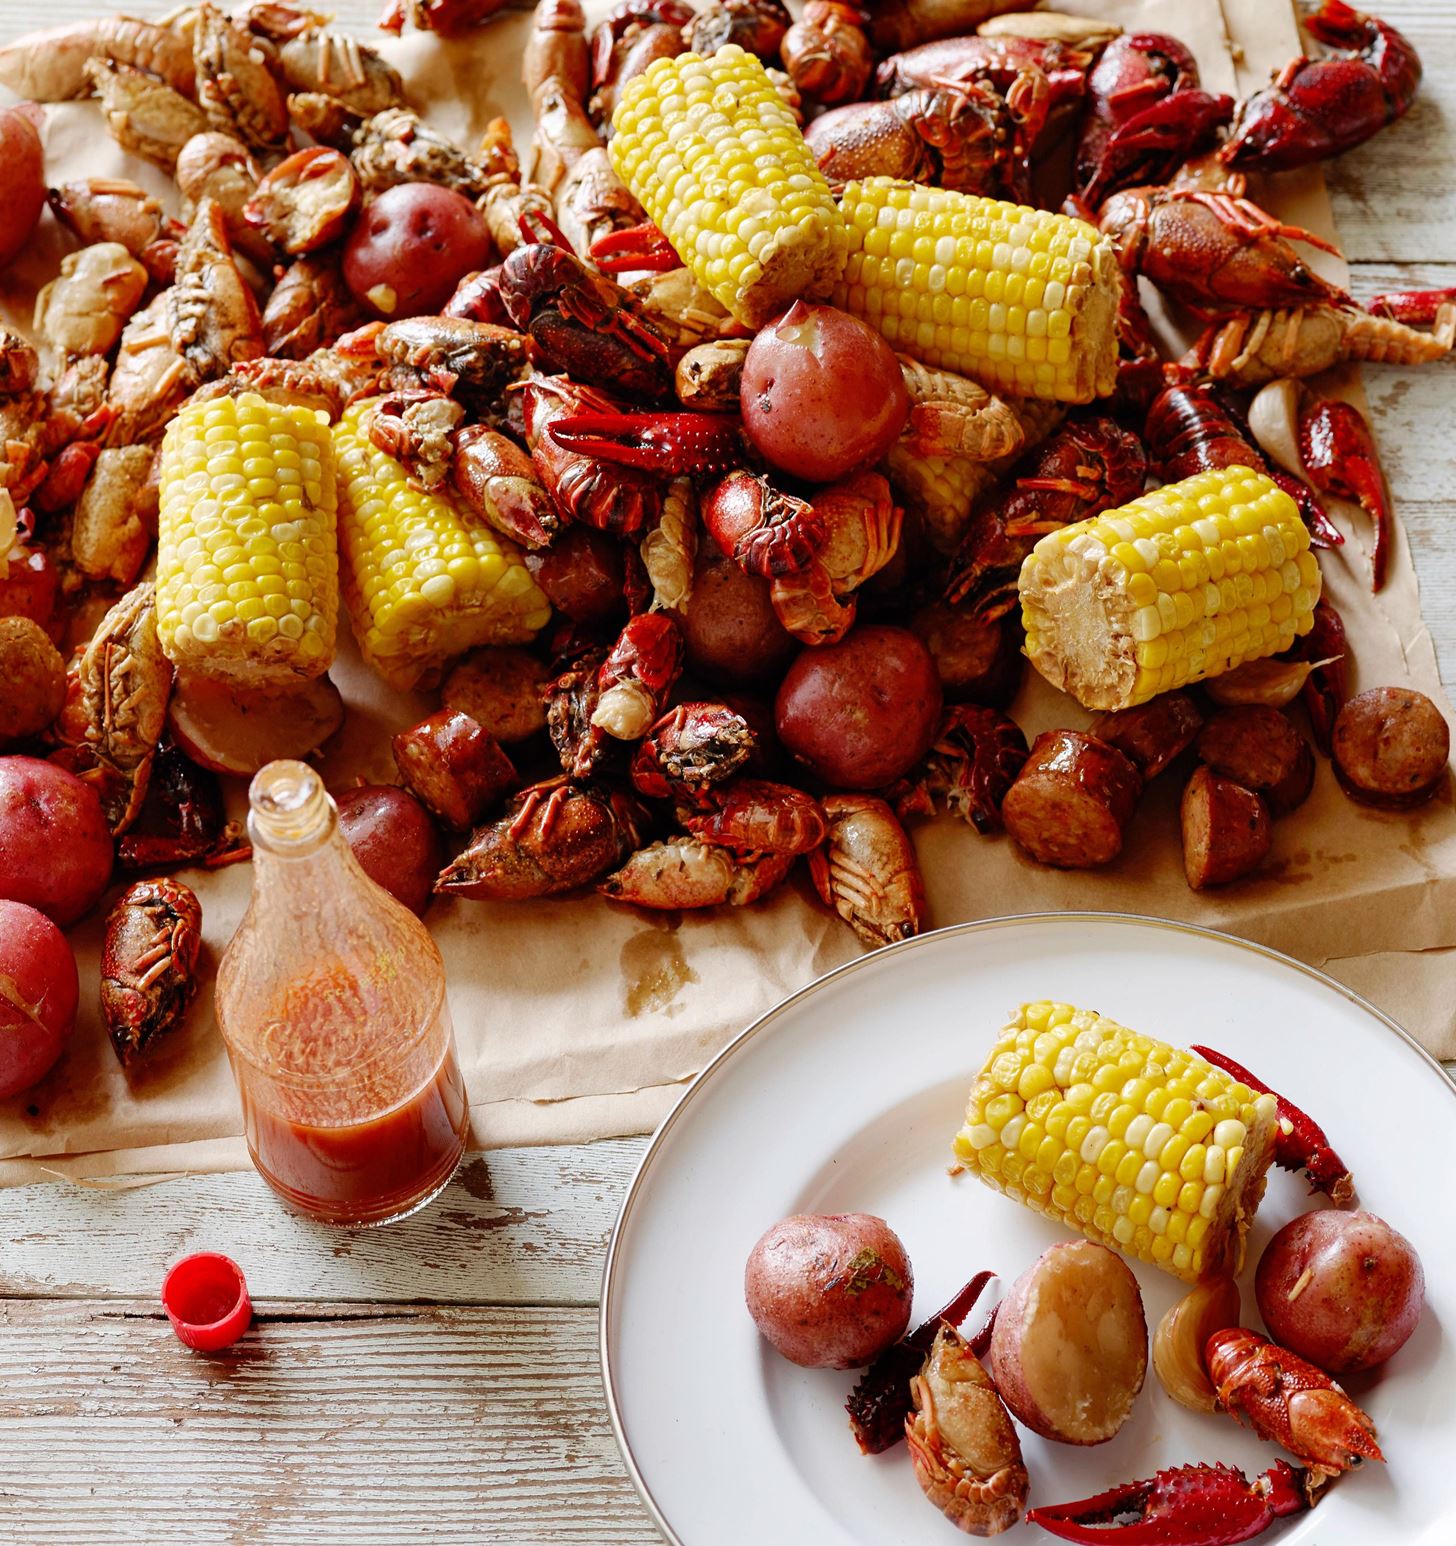 How to Eat Boiled Crawfish